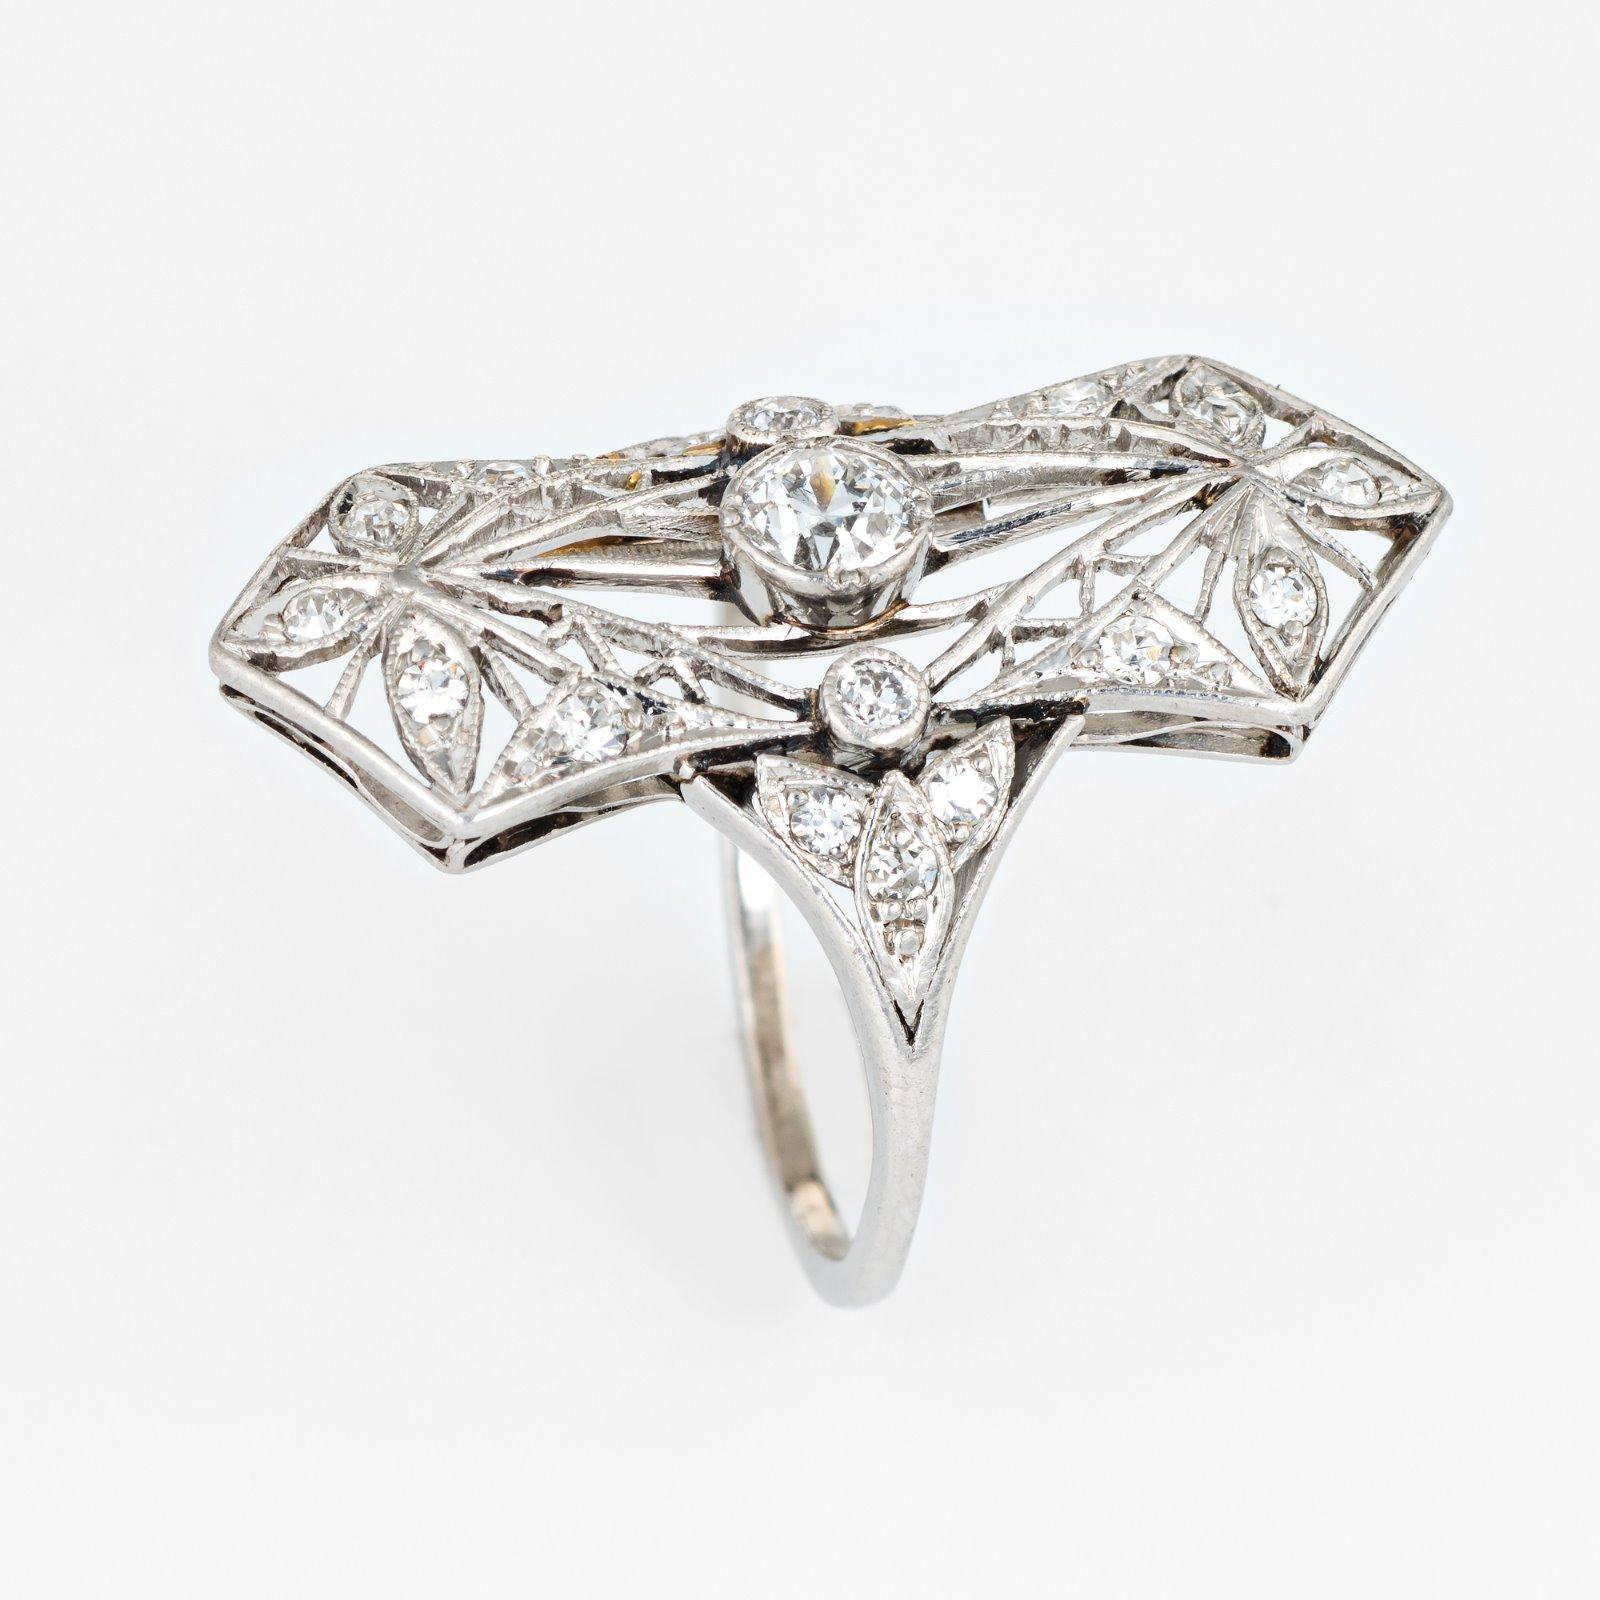 Finely detailed antique Edwardian ring (circa 1900s to 1910s) crafted in 900 platinum. 

Centrally mounted estimated 0.25 carat old Mine cut diamond is accented with 18 x estimated 0.02 to 0.03 carat diamonds. The total diamond weight is estimated